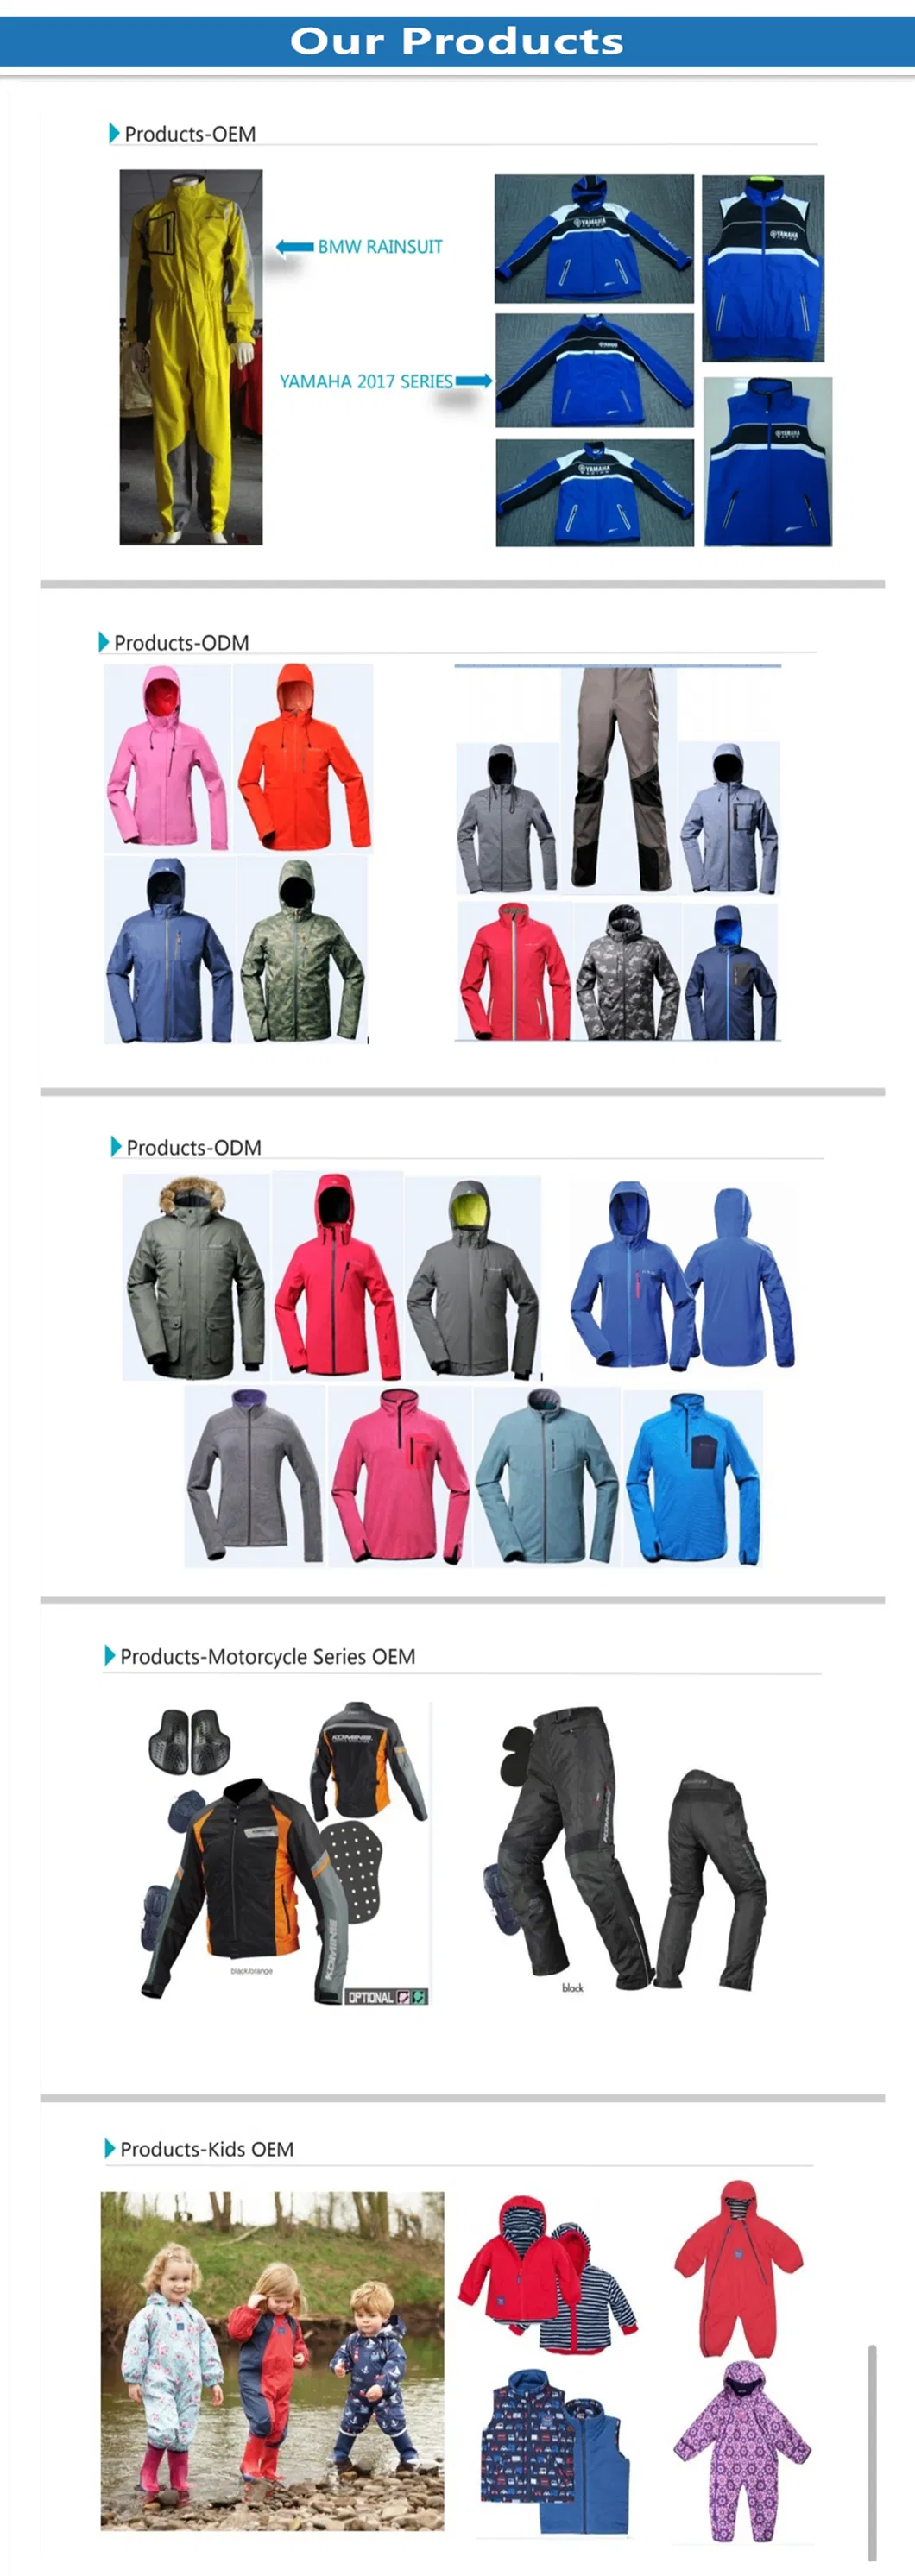 Hot Selling Outdoor Jacket Lightweight Cycling Hiking Jacket Lightweight Breathable Wind Breaker Jacket